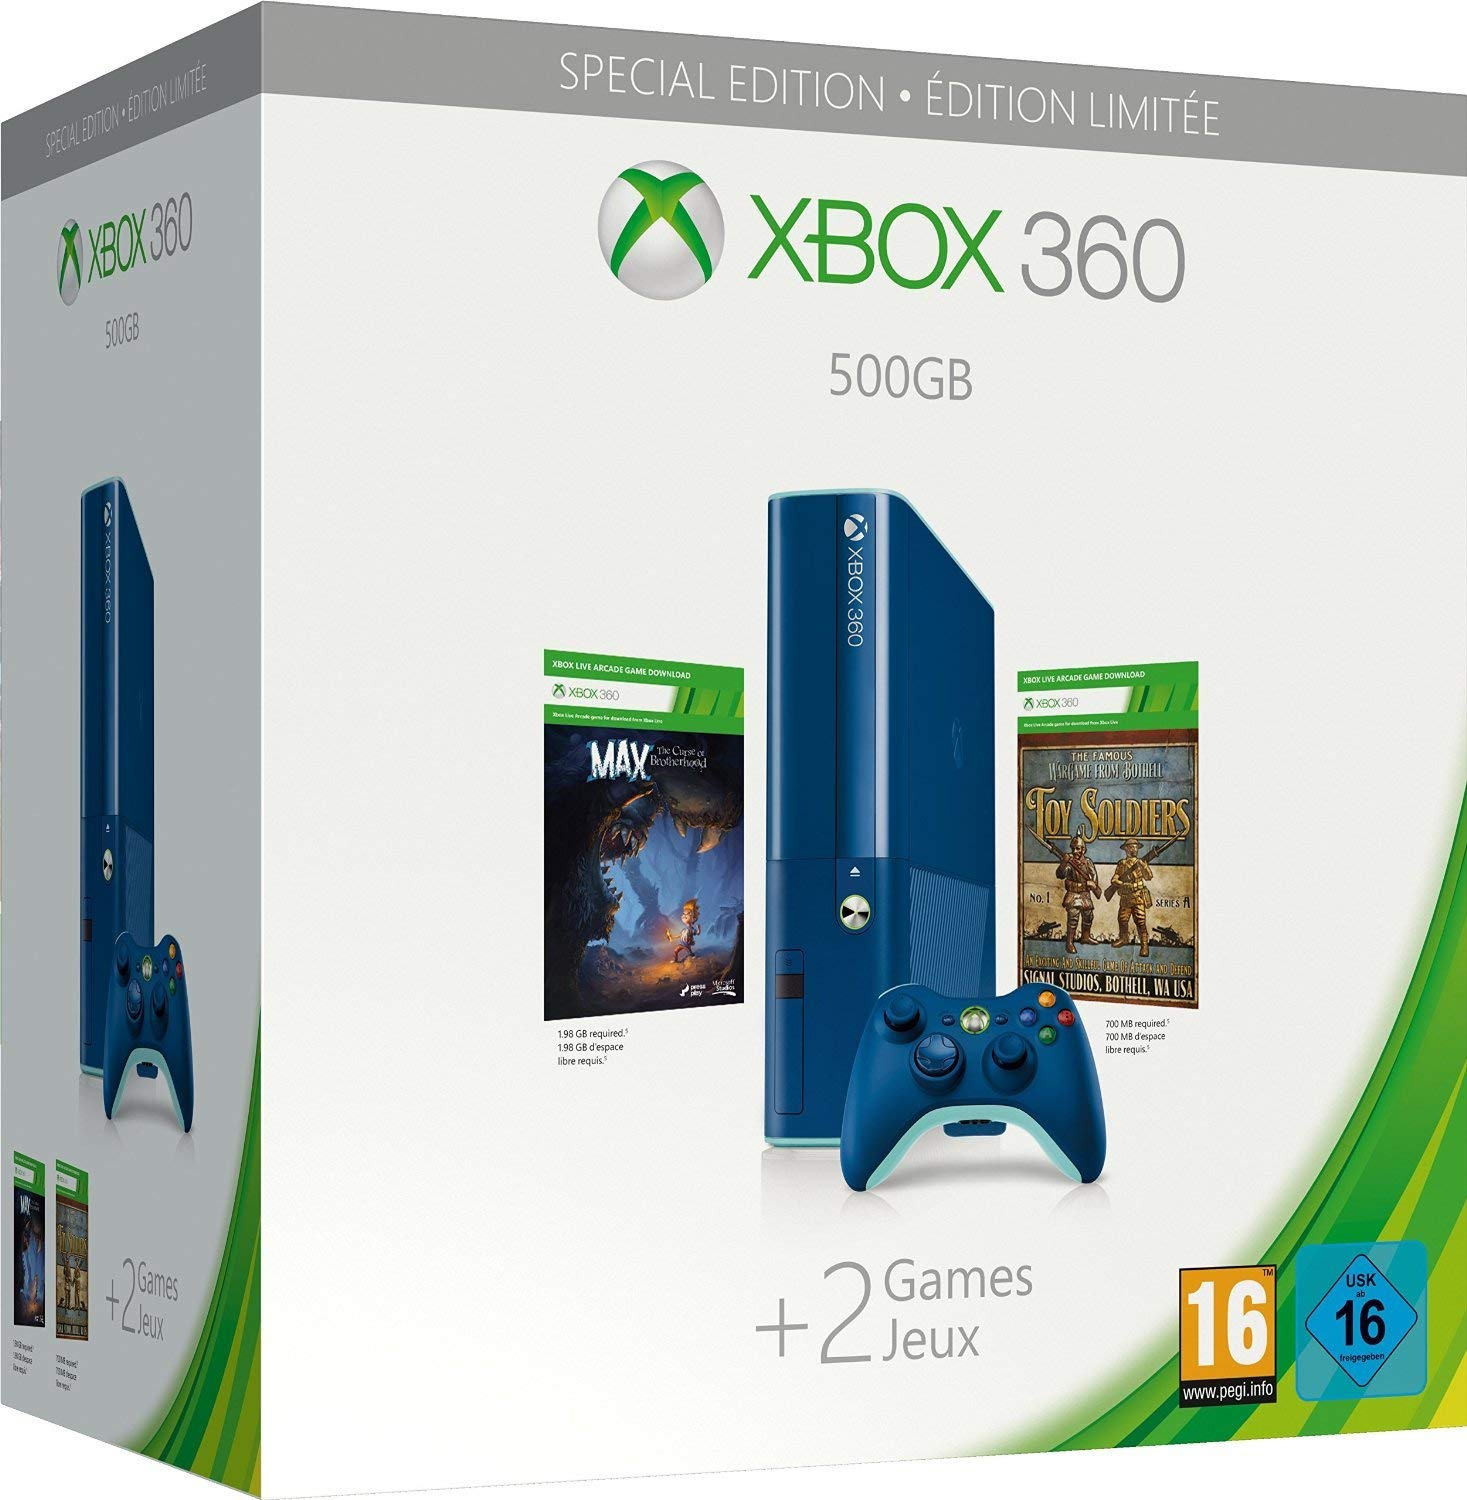 Xbox 360 Slim 500 GB Limited Blue Edition + Max + Toy Soldiers